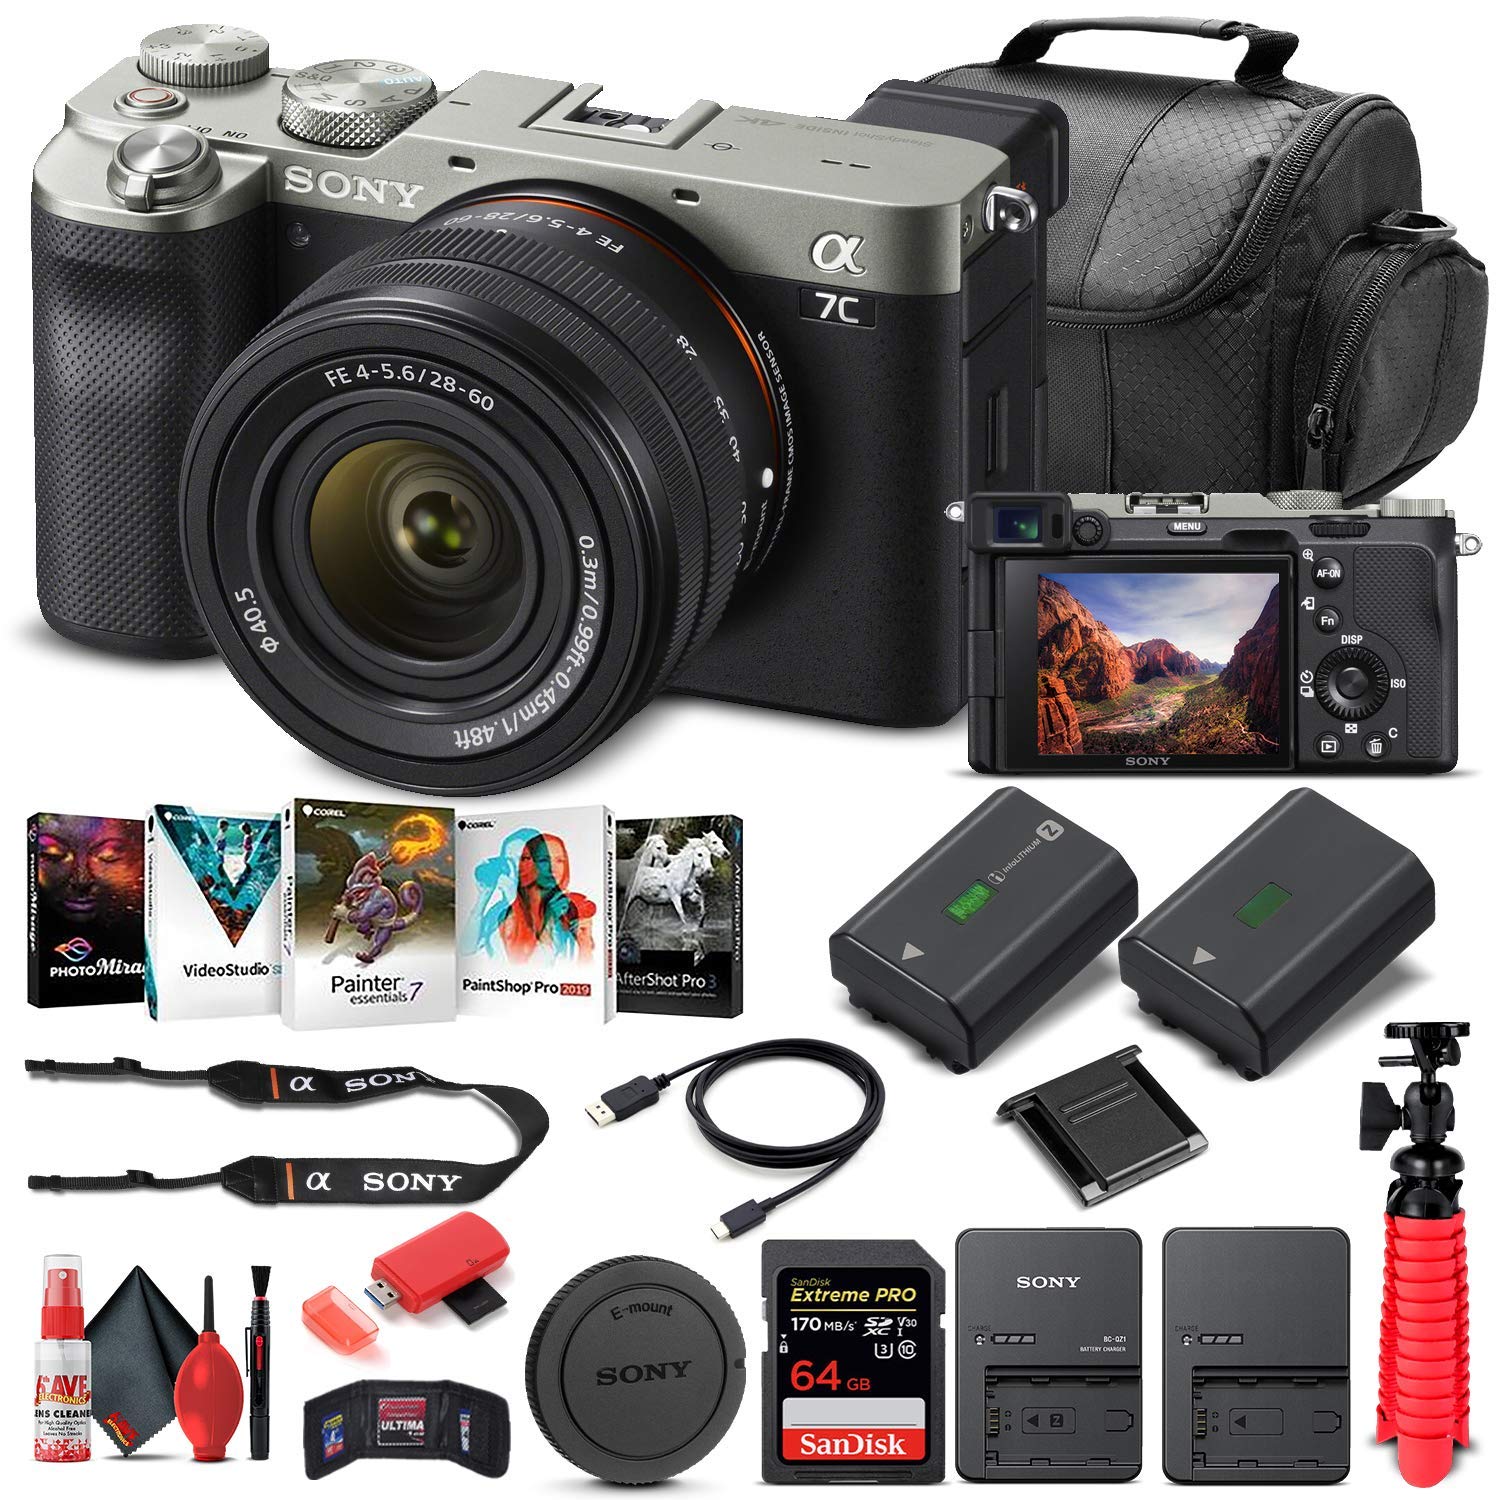 Sony Alpha a7C Mirrorless Digital Camera with 28-60mm Lens (Silver) (ILCE7CL/S) + 64GB Memory Card + NP-FZ-100 Battery + Corel Photo Software + Case + External Charger + Card Reader + More (Renewed)